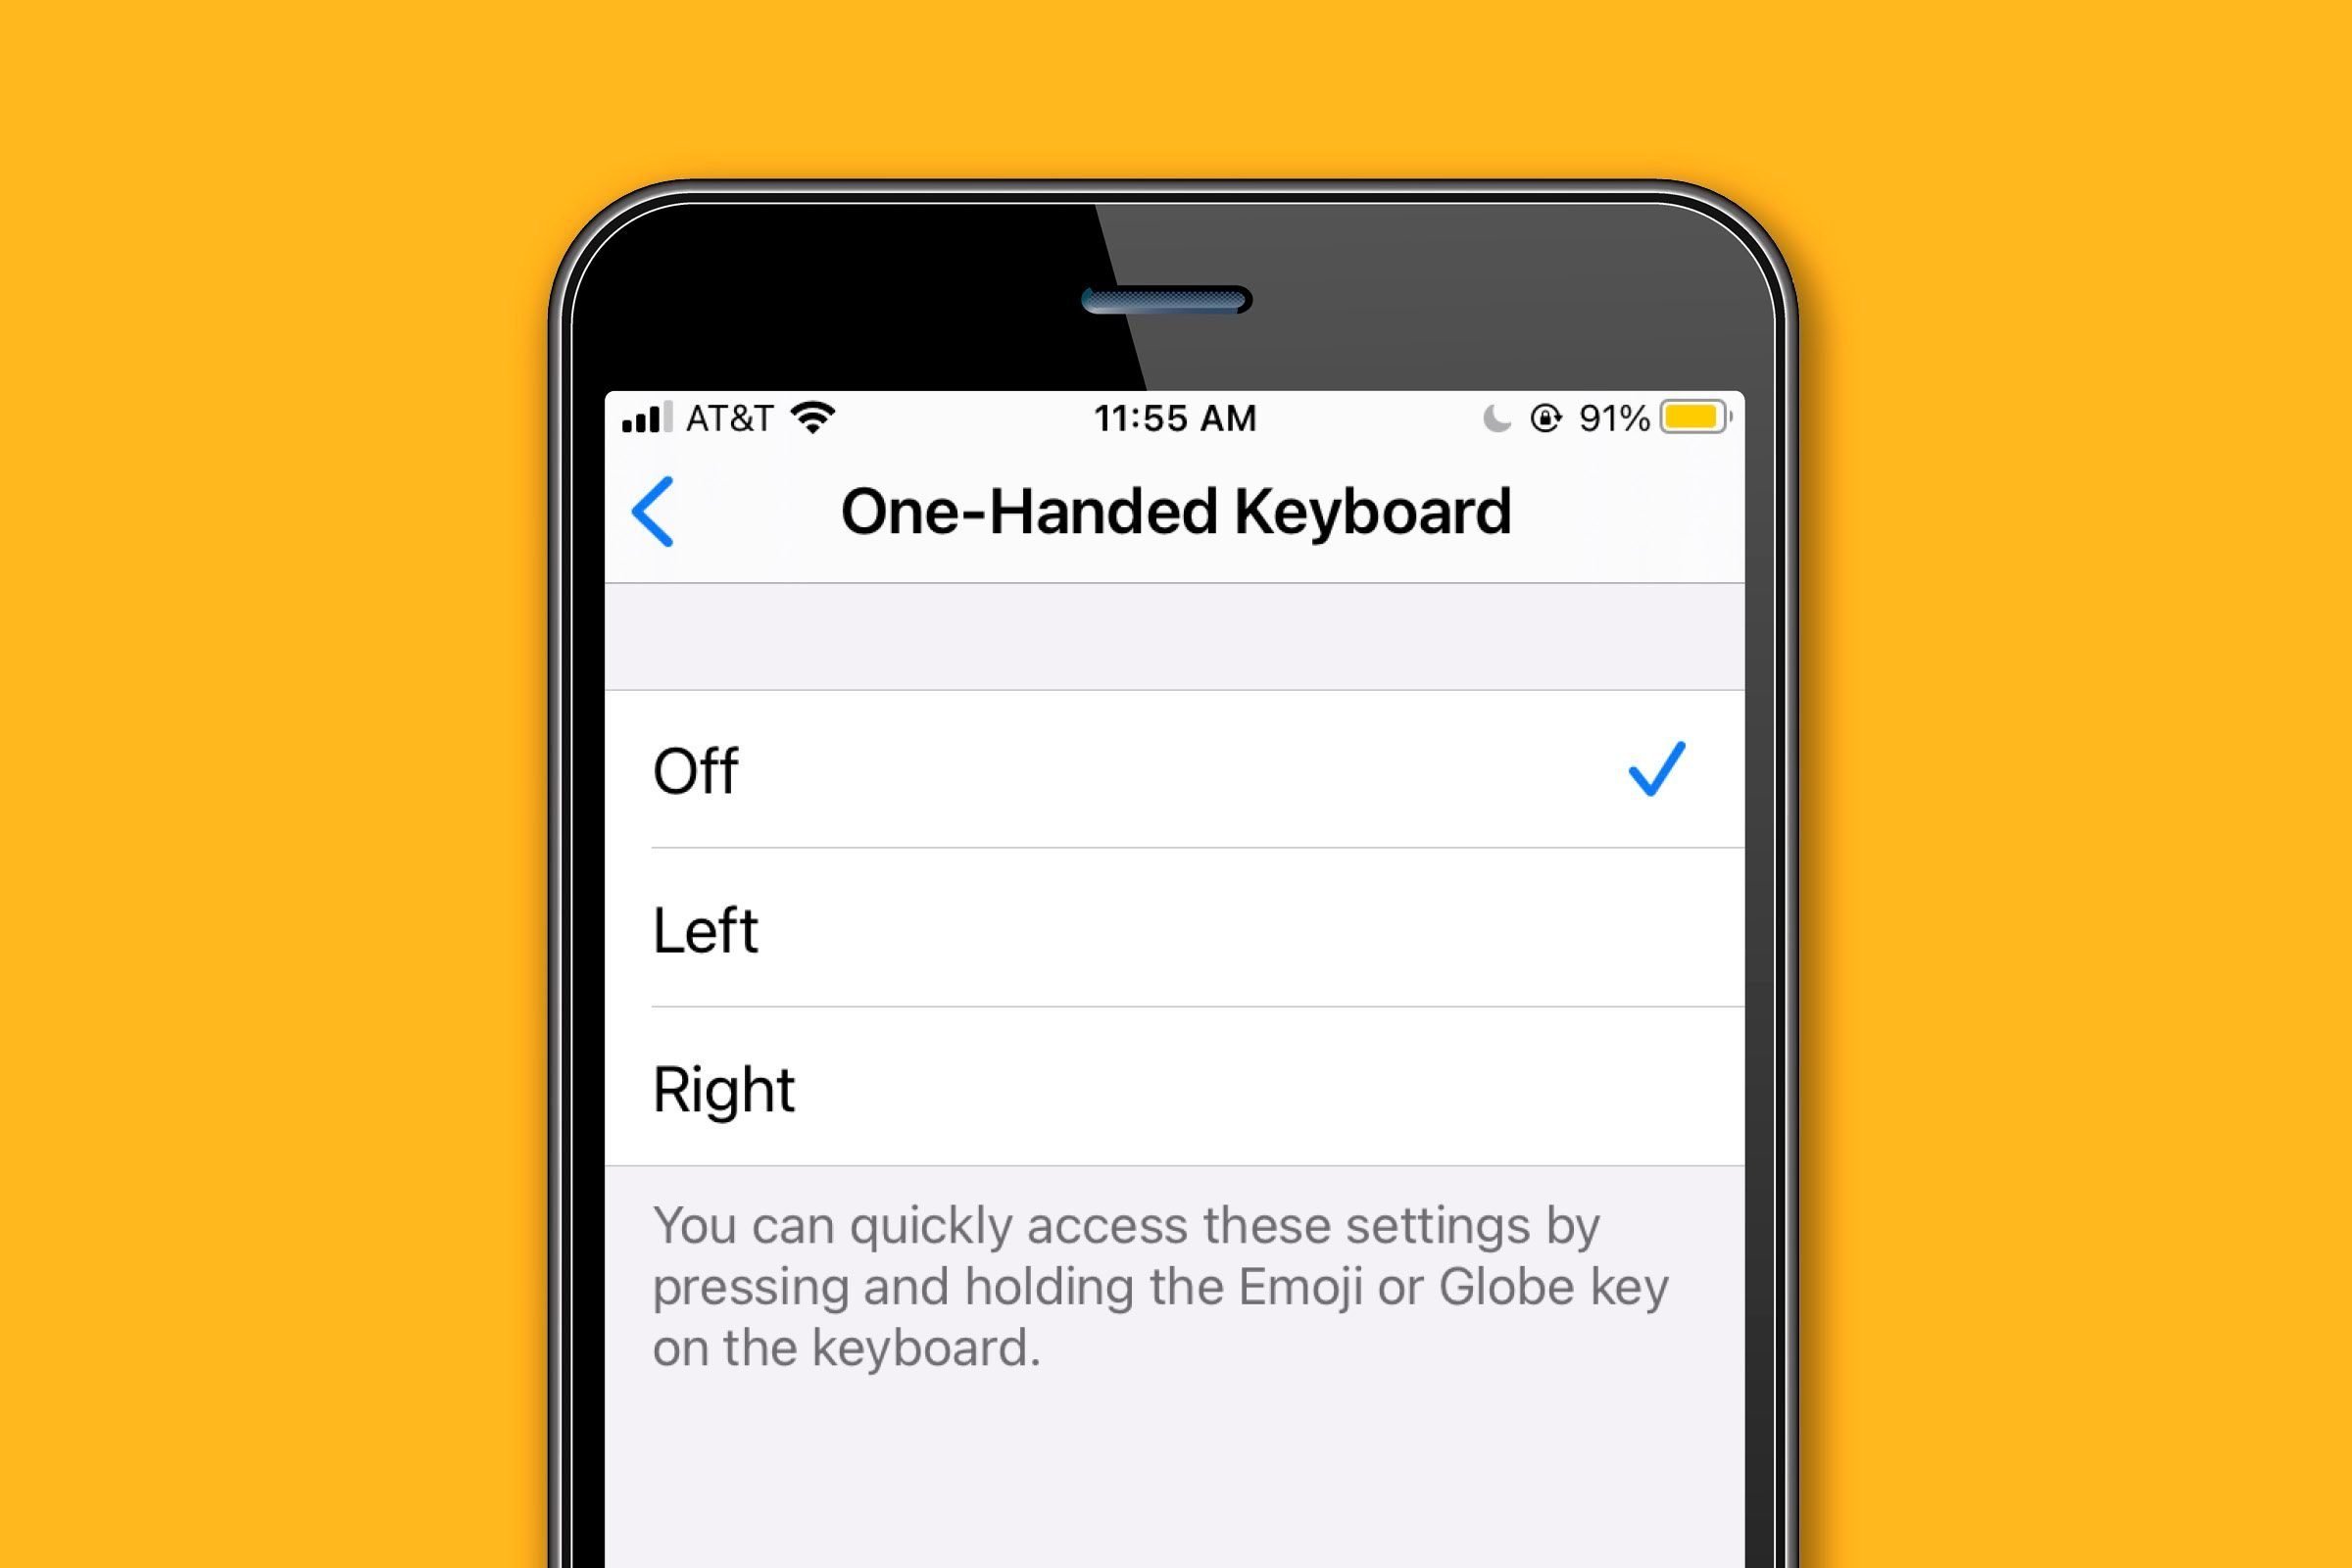 Access the one-handed keyboard